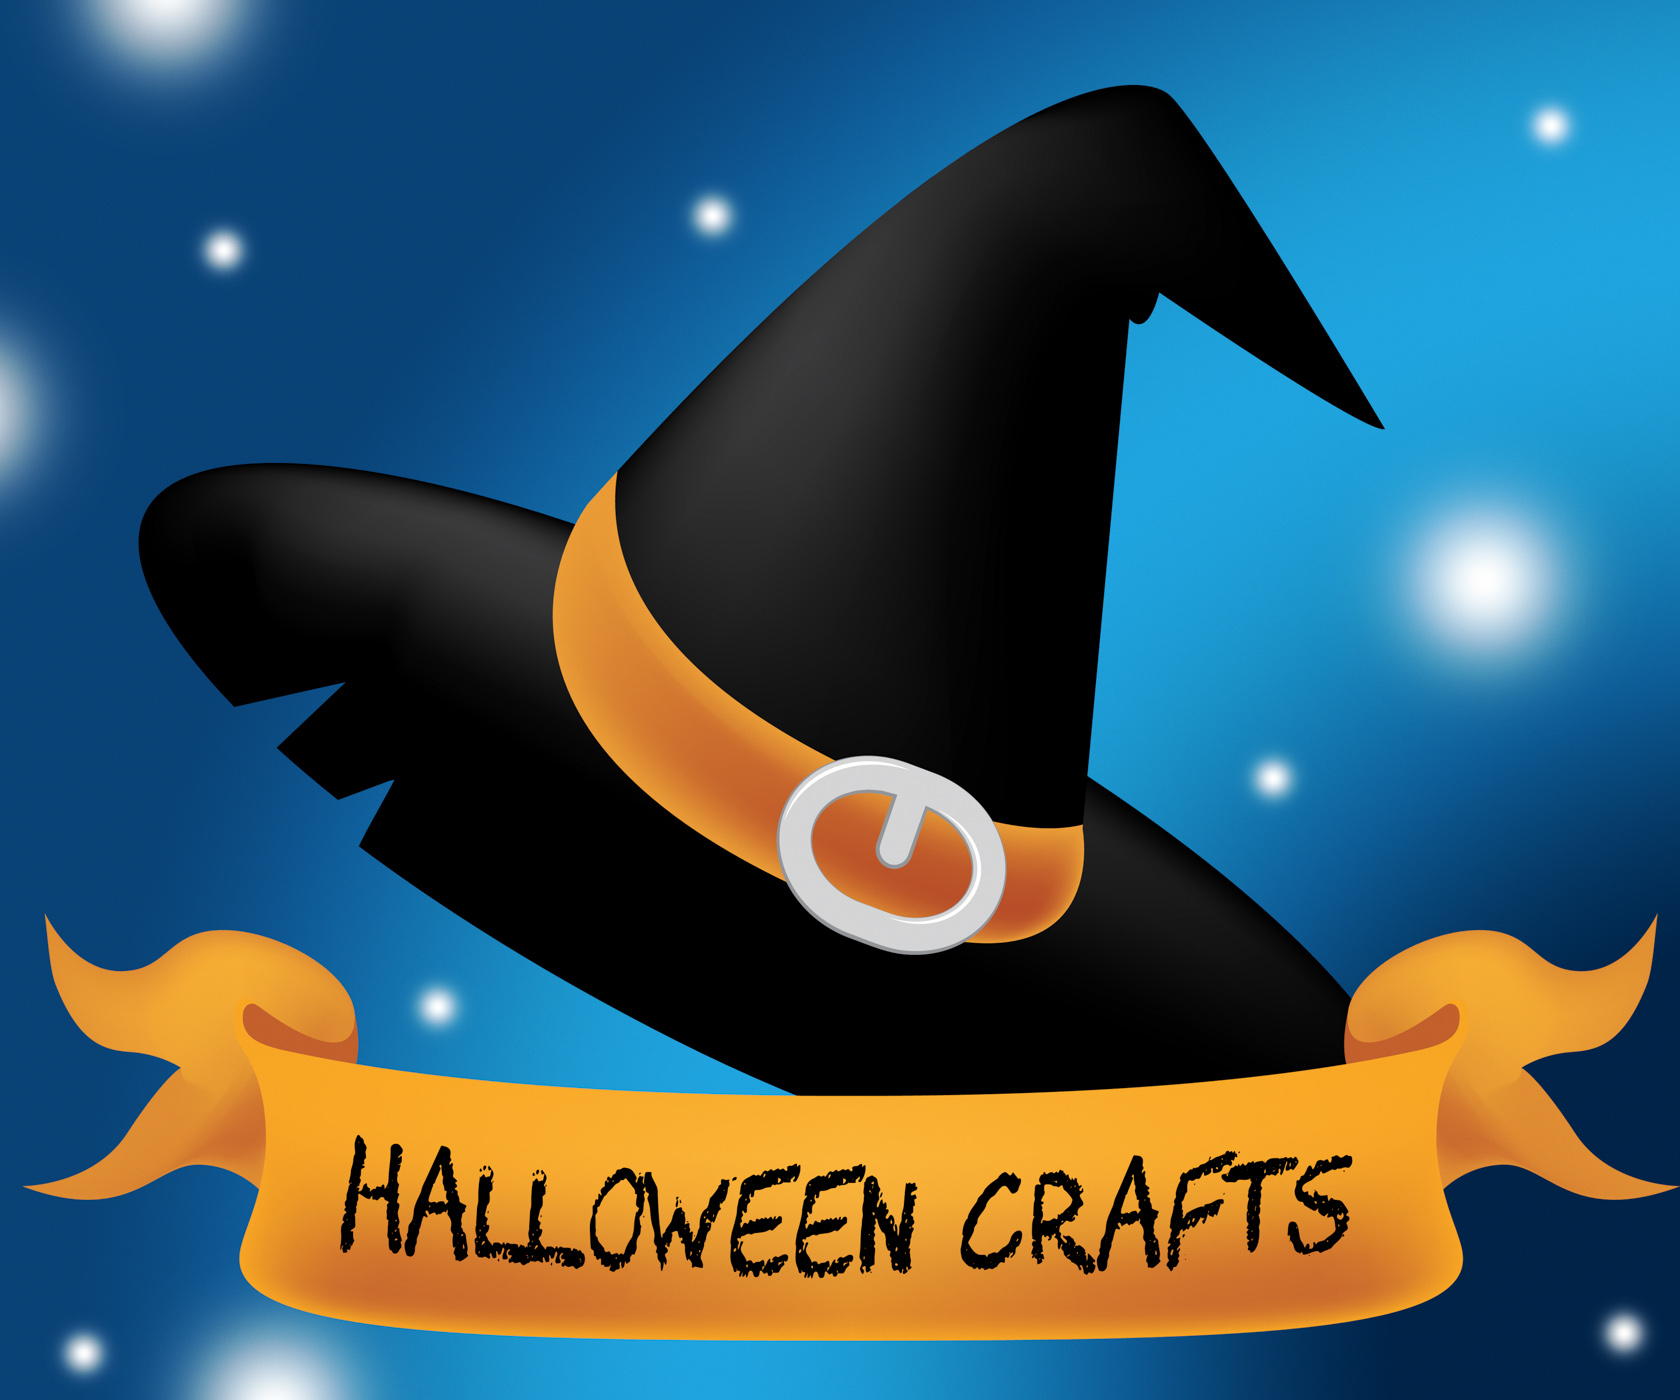 Halloween crafts means trick or treat and art photo